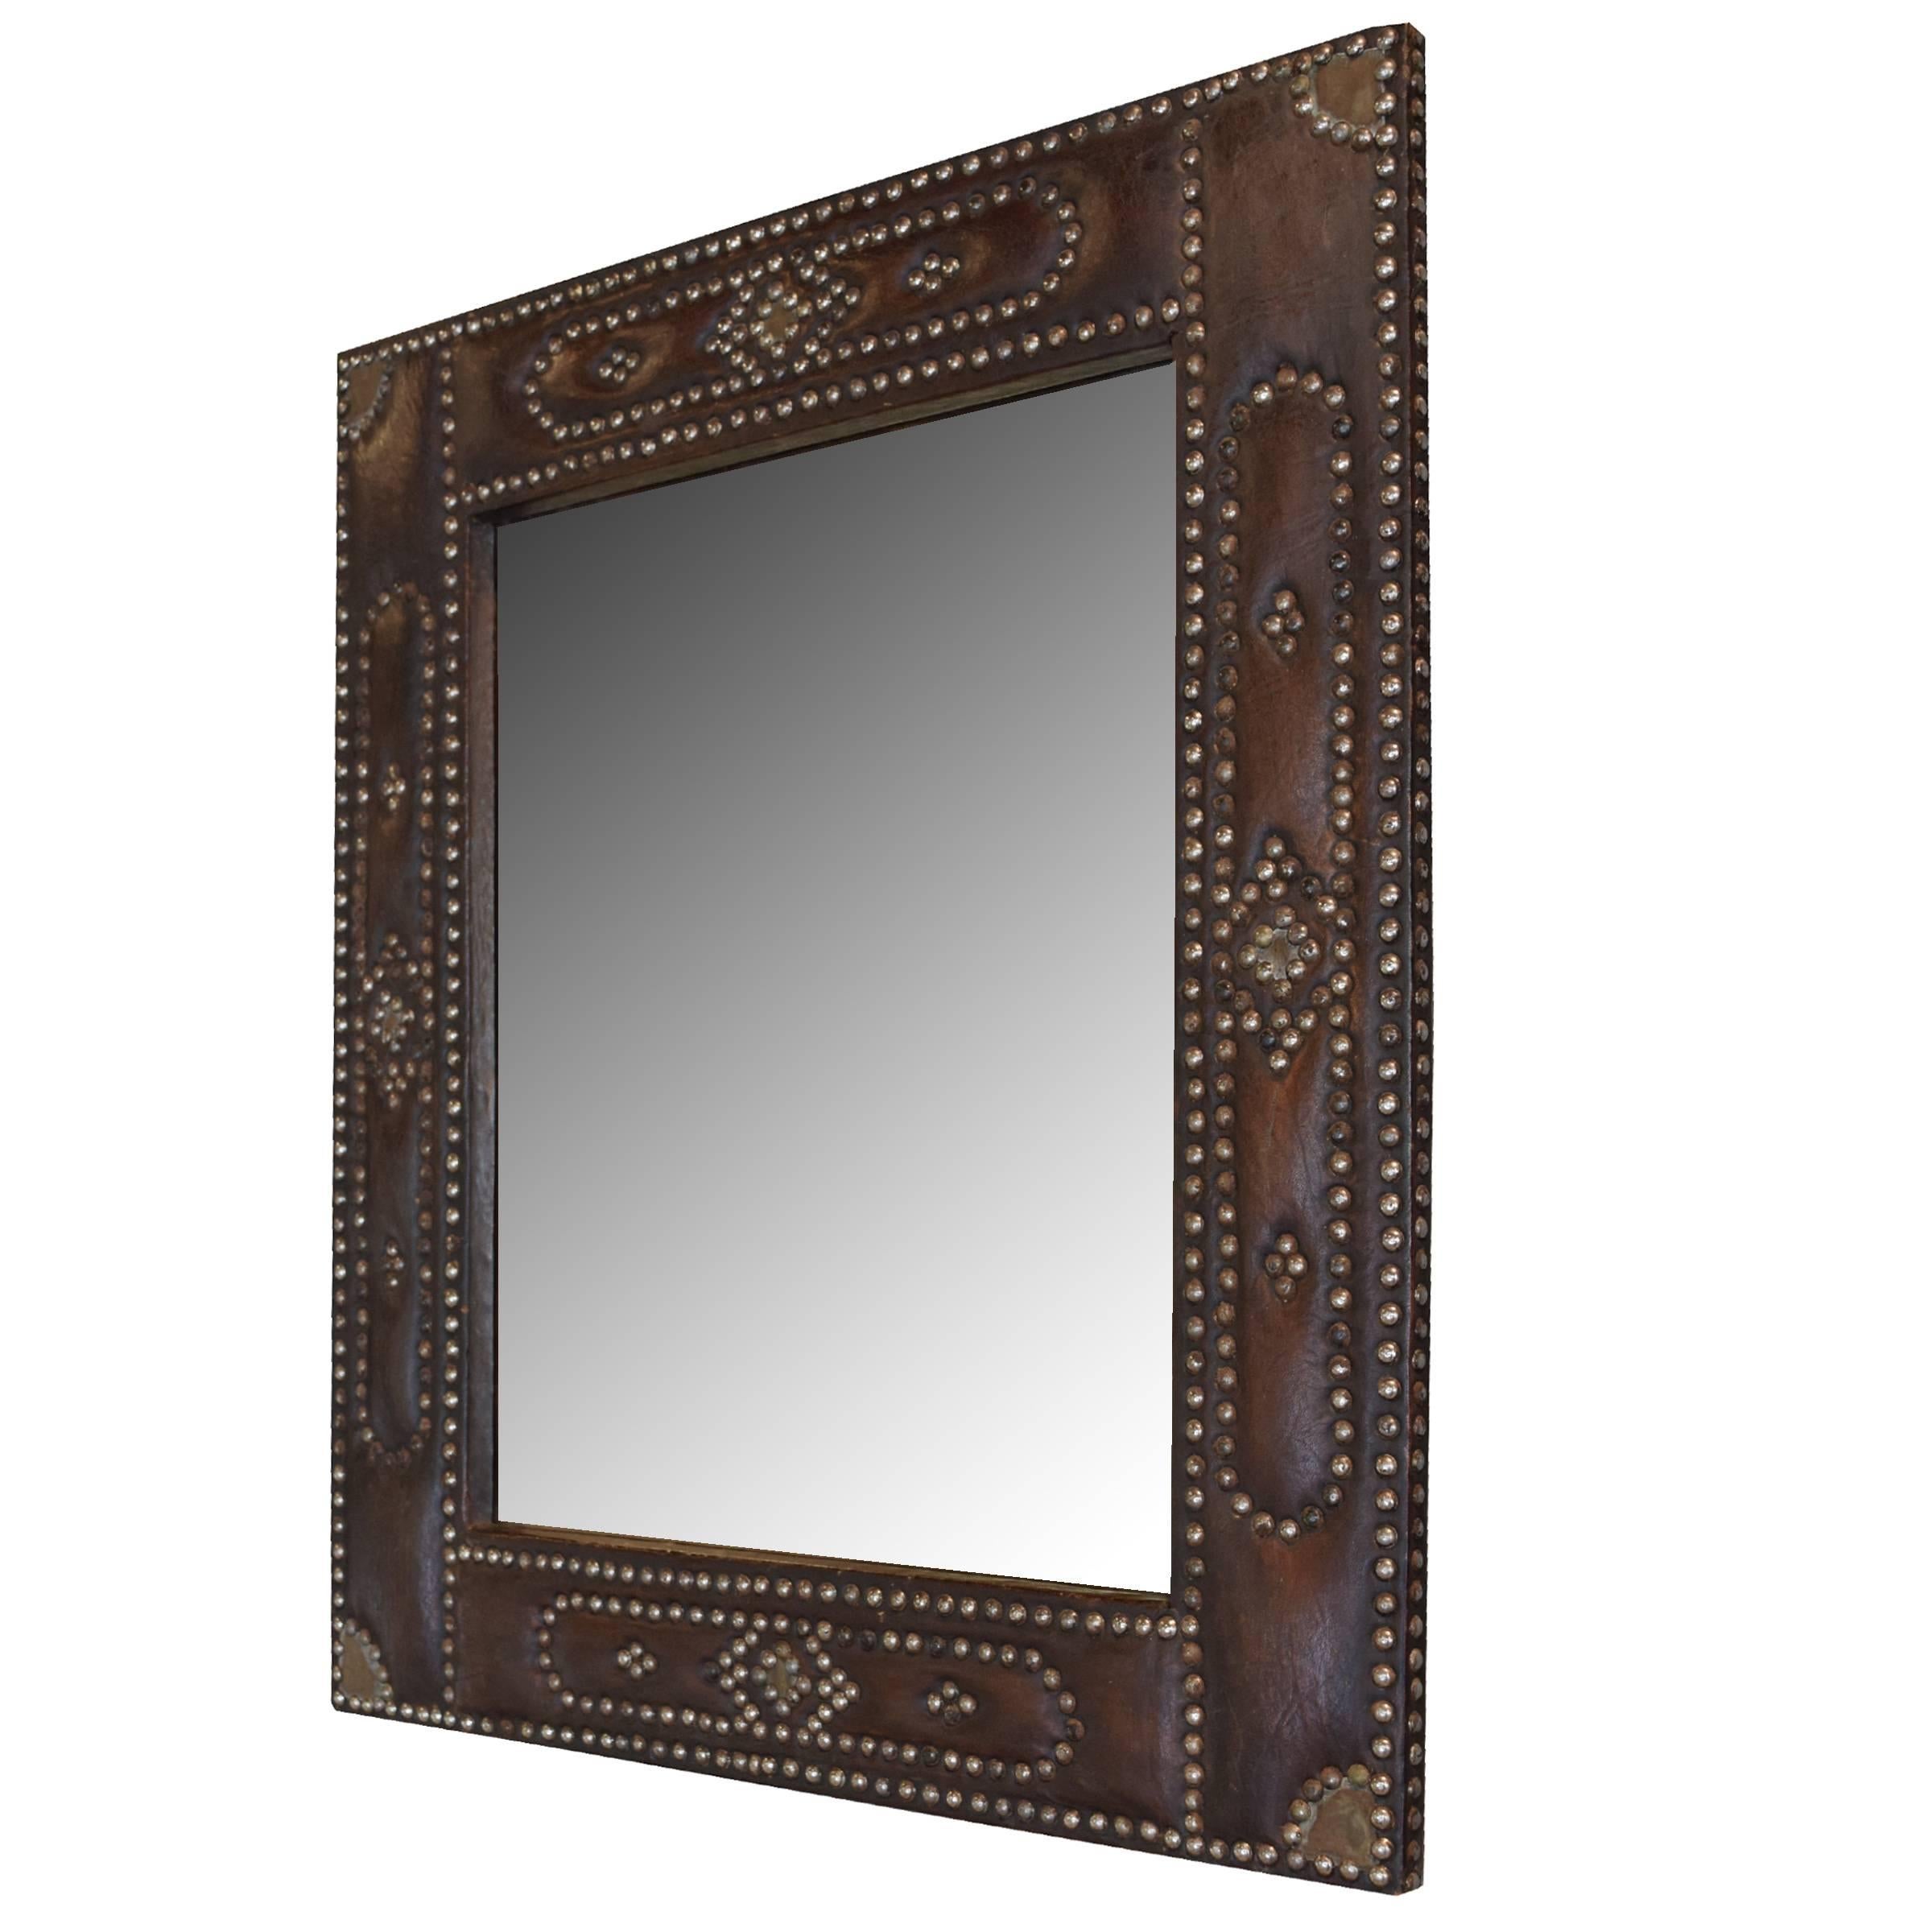 A French mirror with a leather frame and decorative brass nailhead detailing.
 